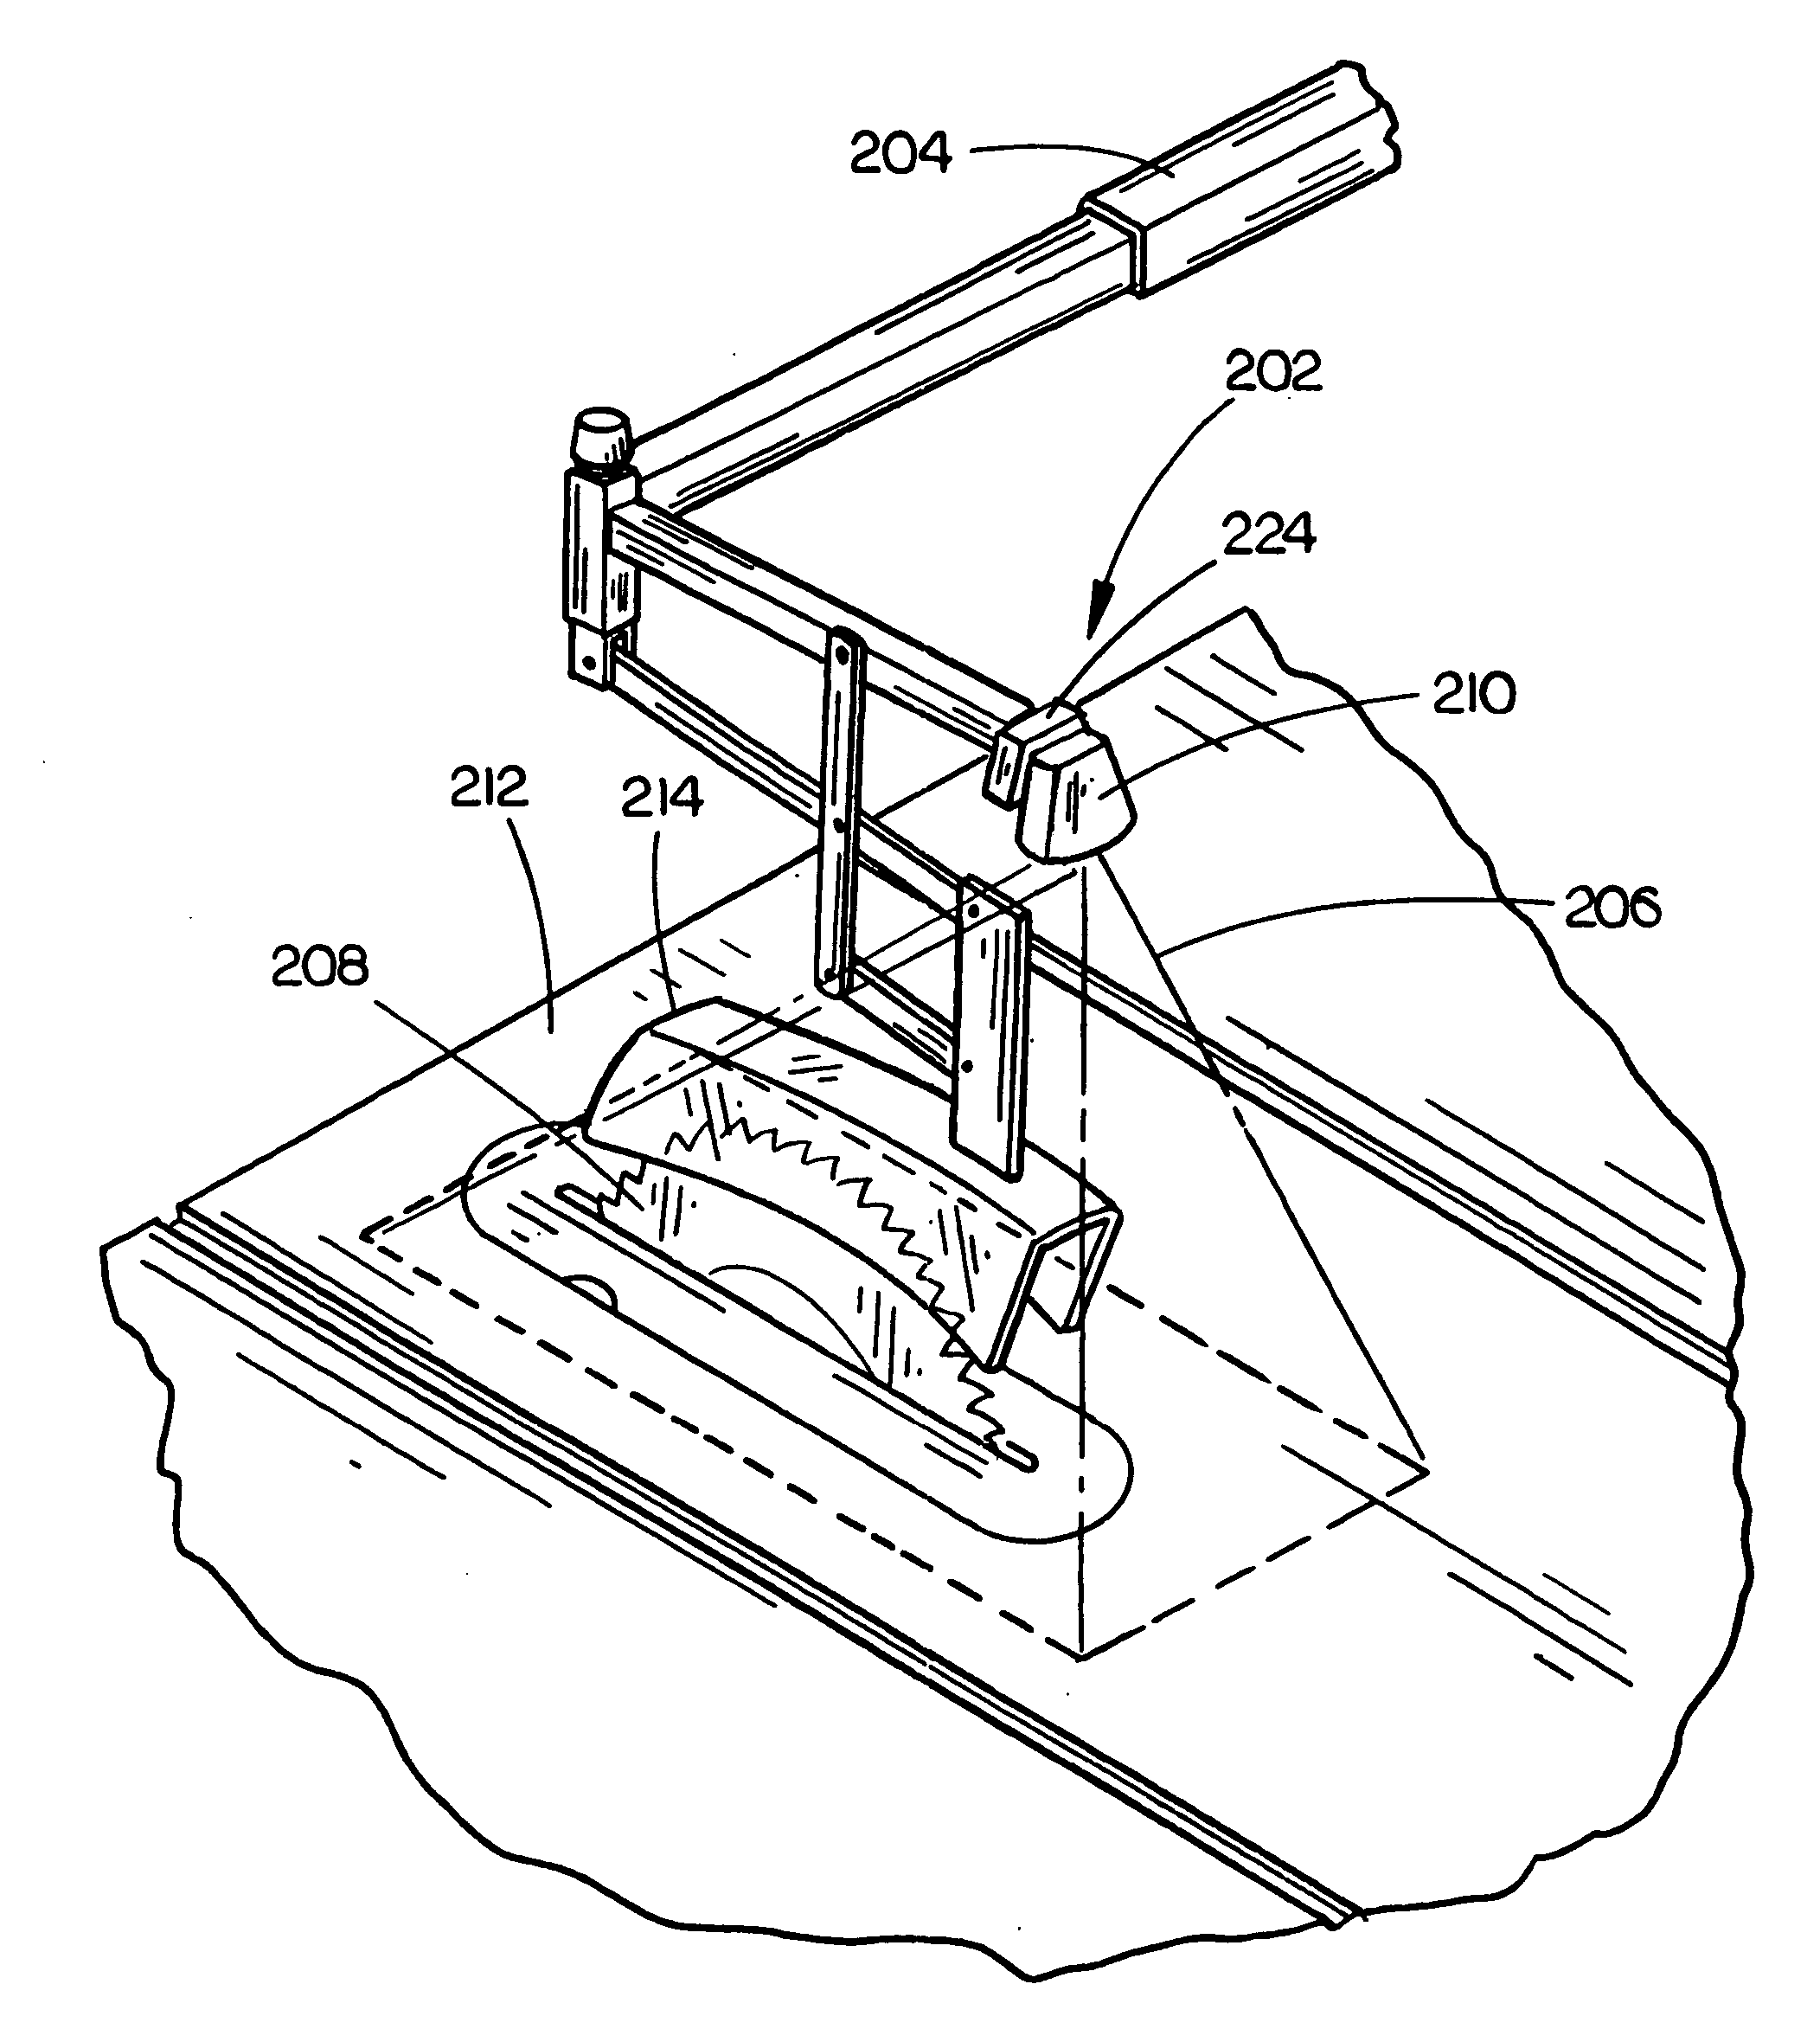 Optical proximity device for power tools